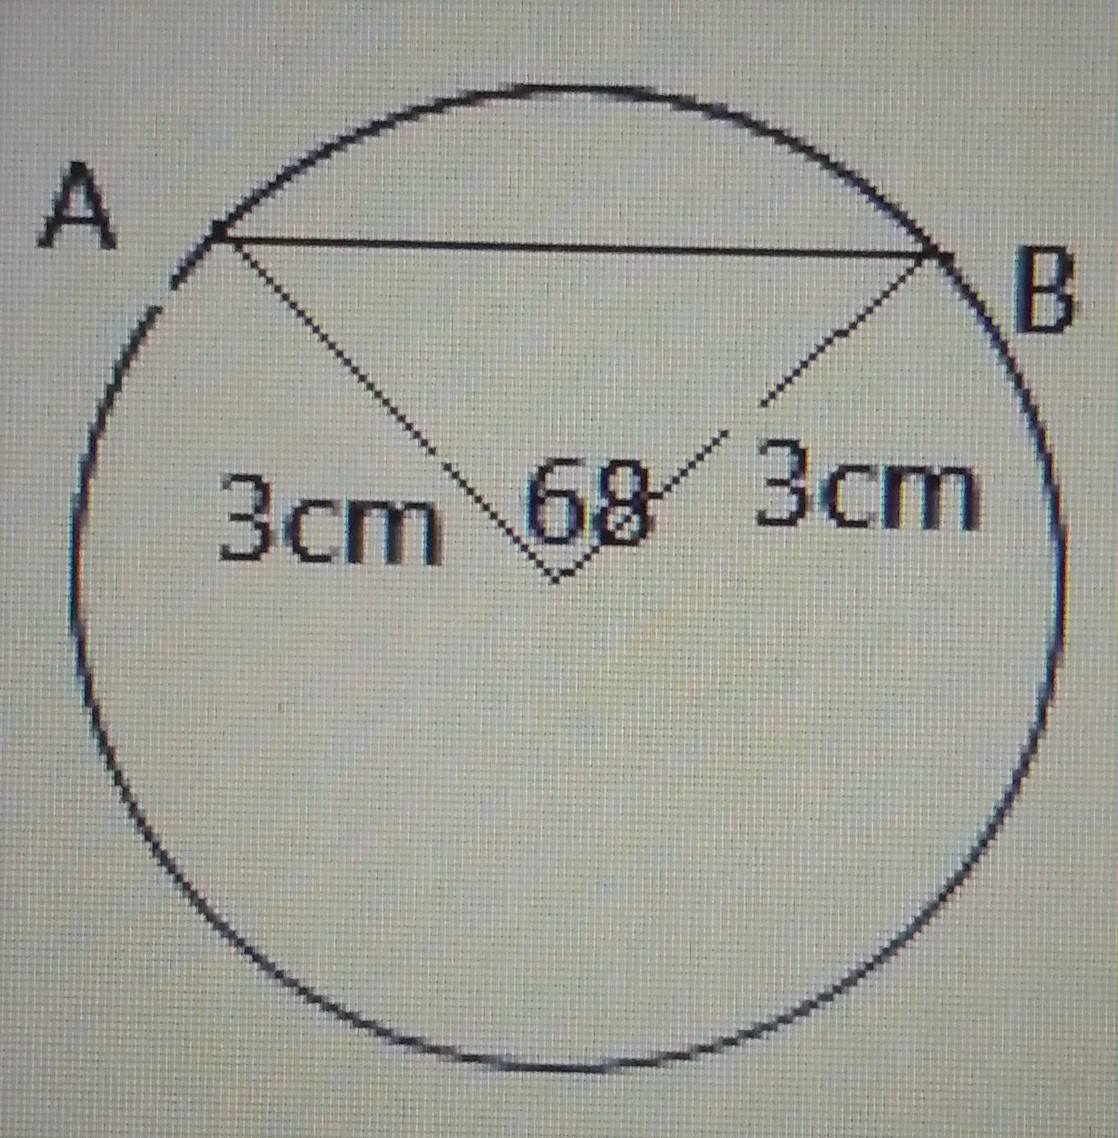 Find the length of the chord |AB| in the diagram shown below.